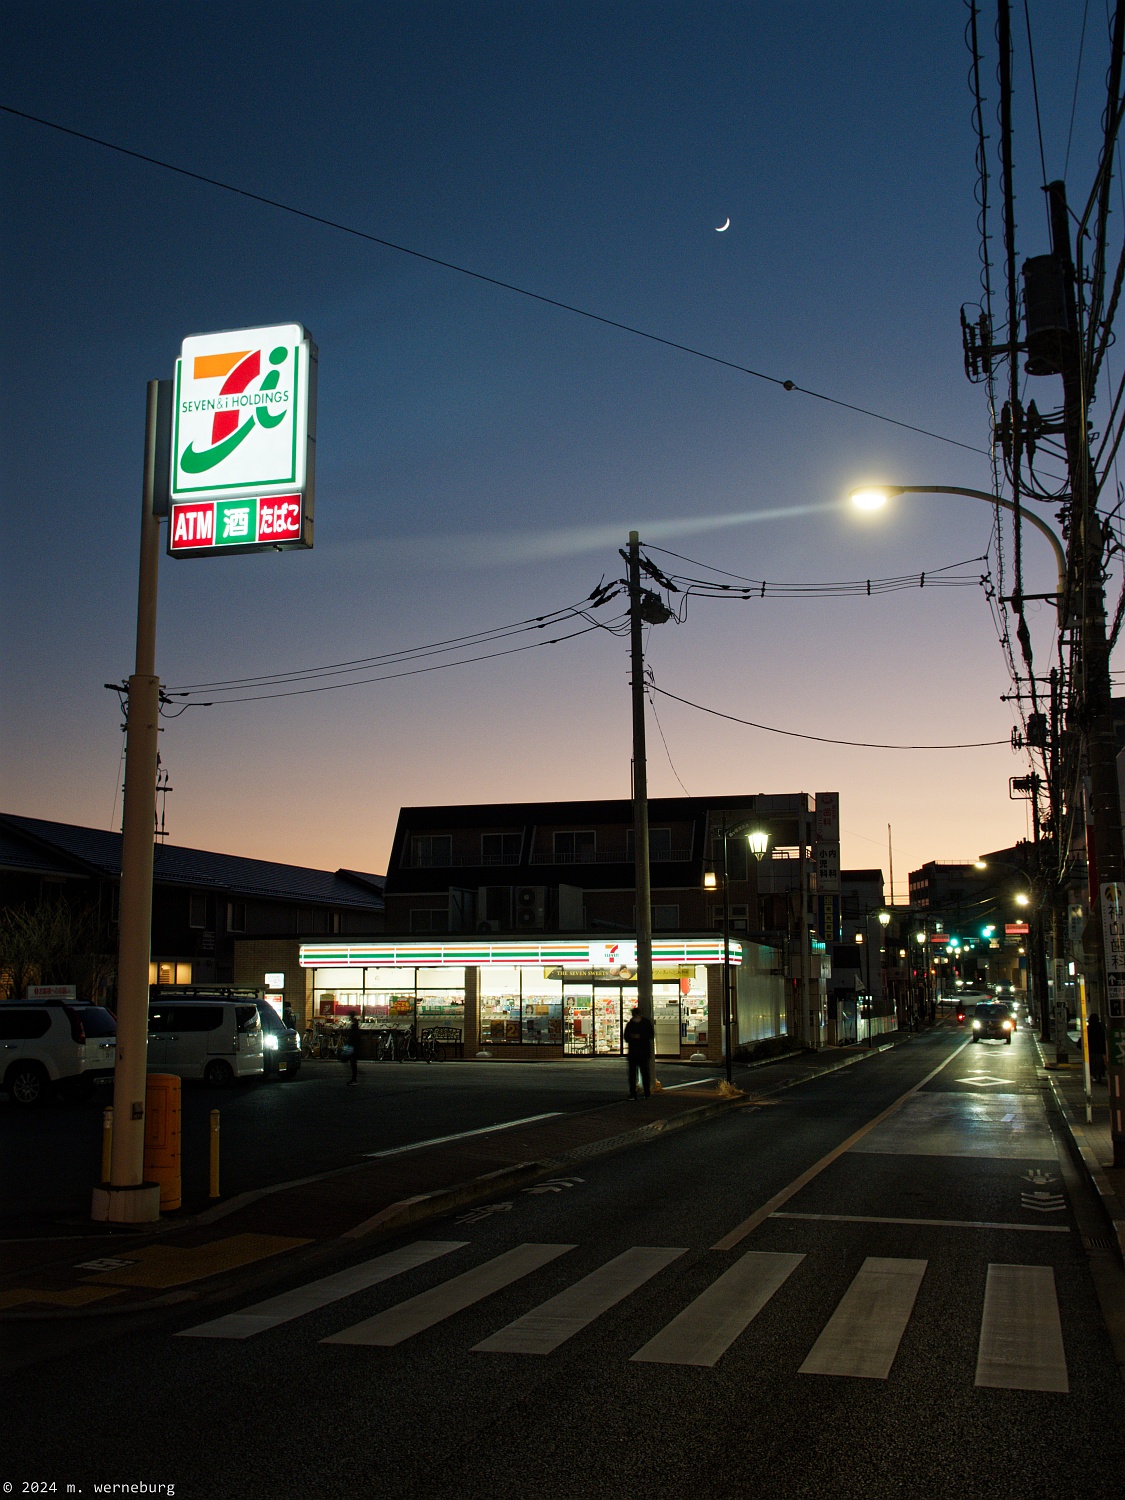 the moon, seven-eleven, and me